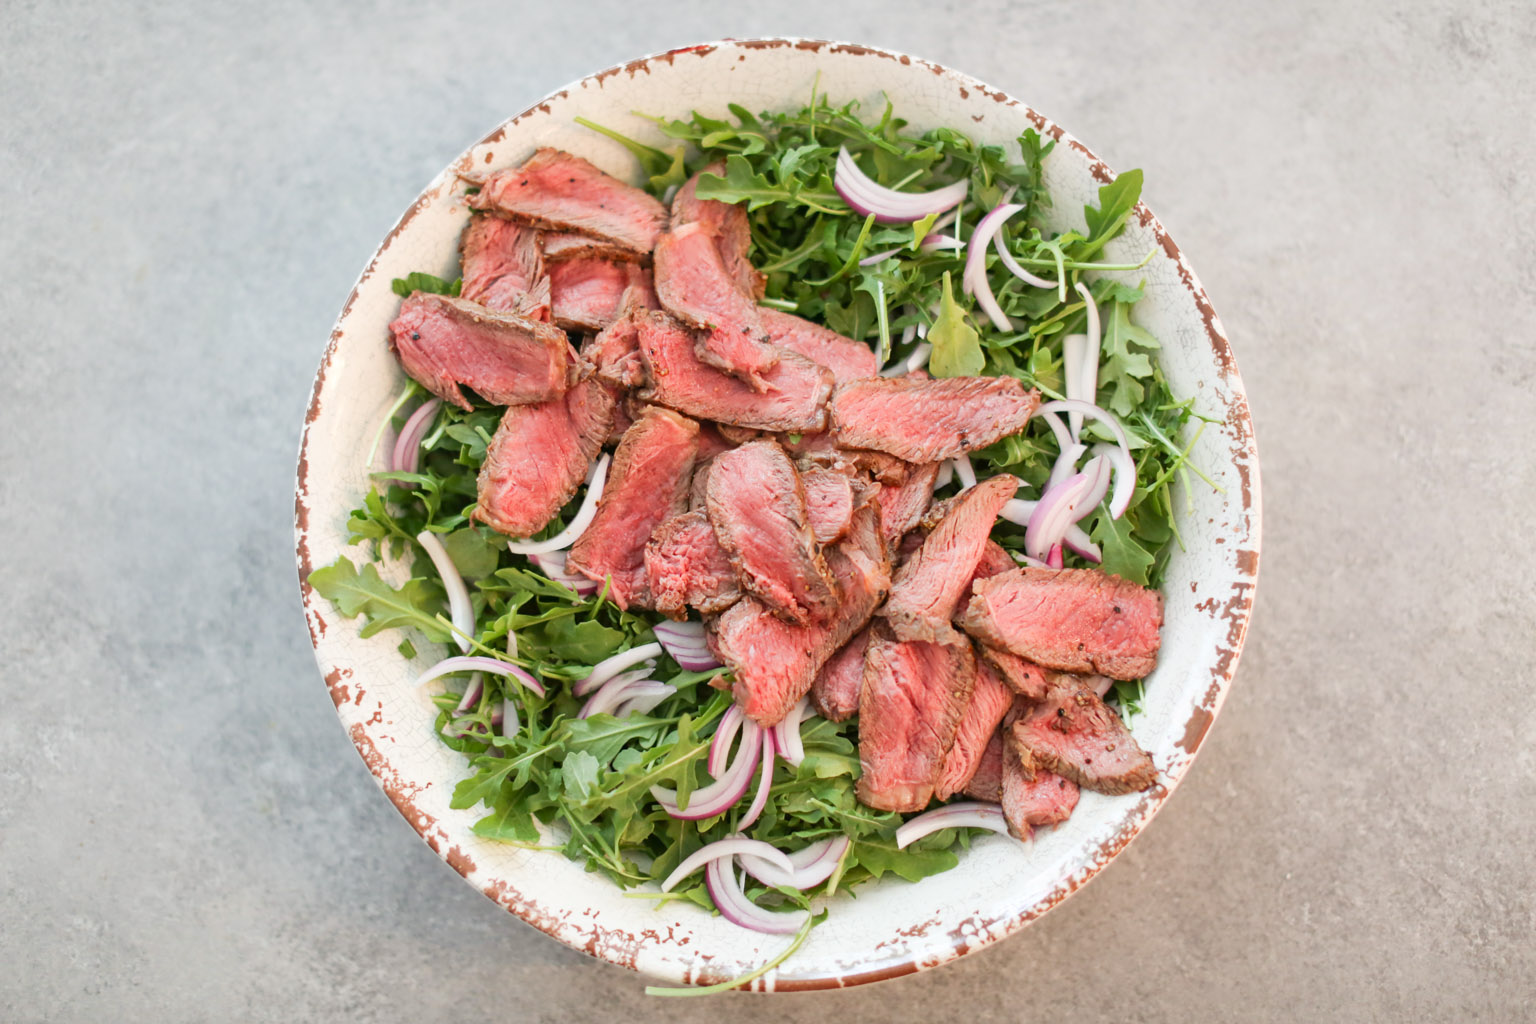 Grilled Steak and Arugula Salad with Balsamic Cherries